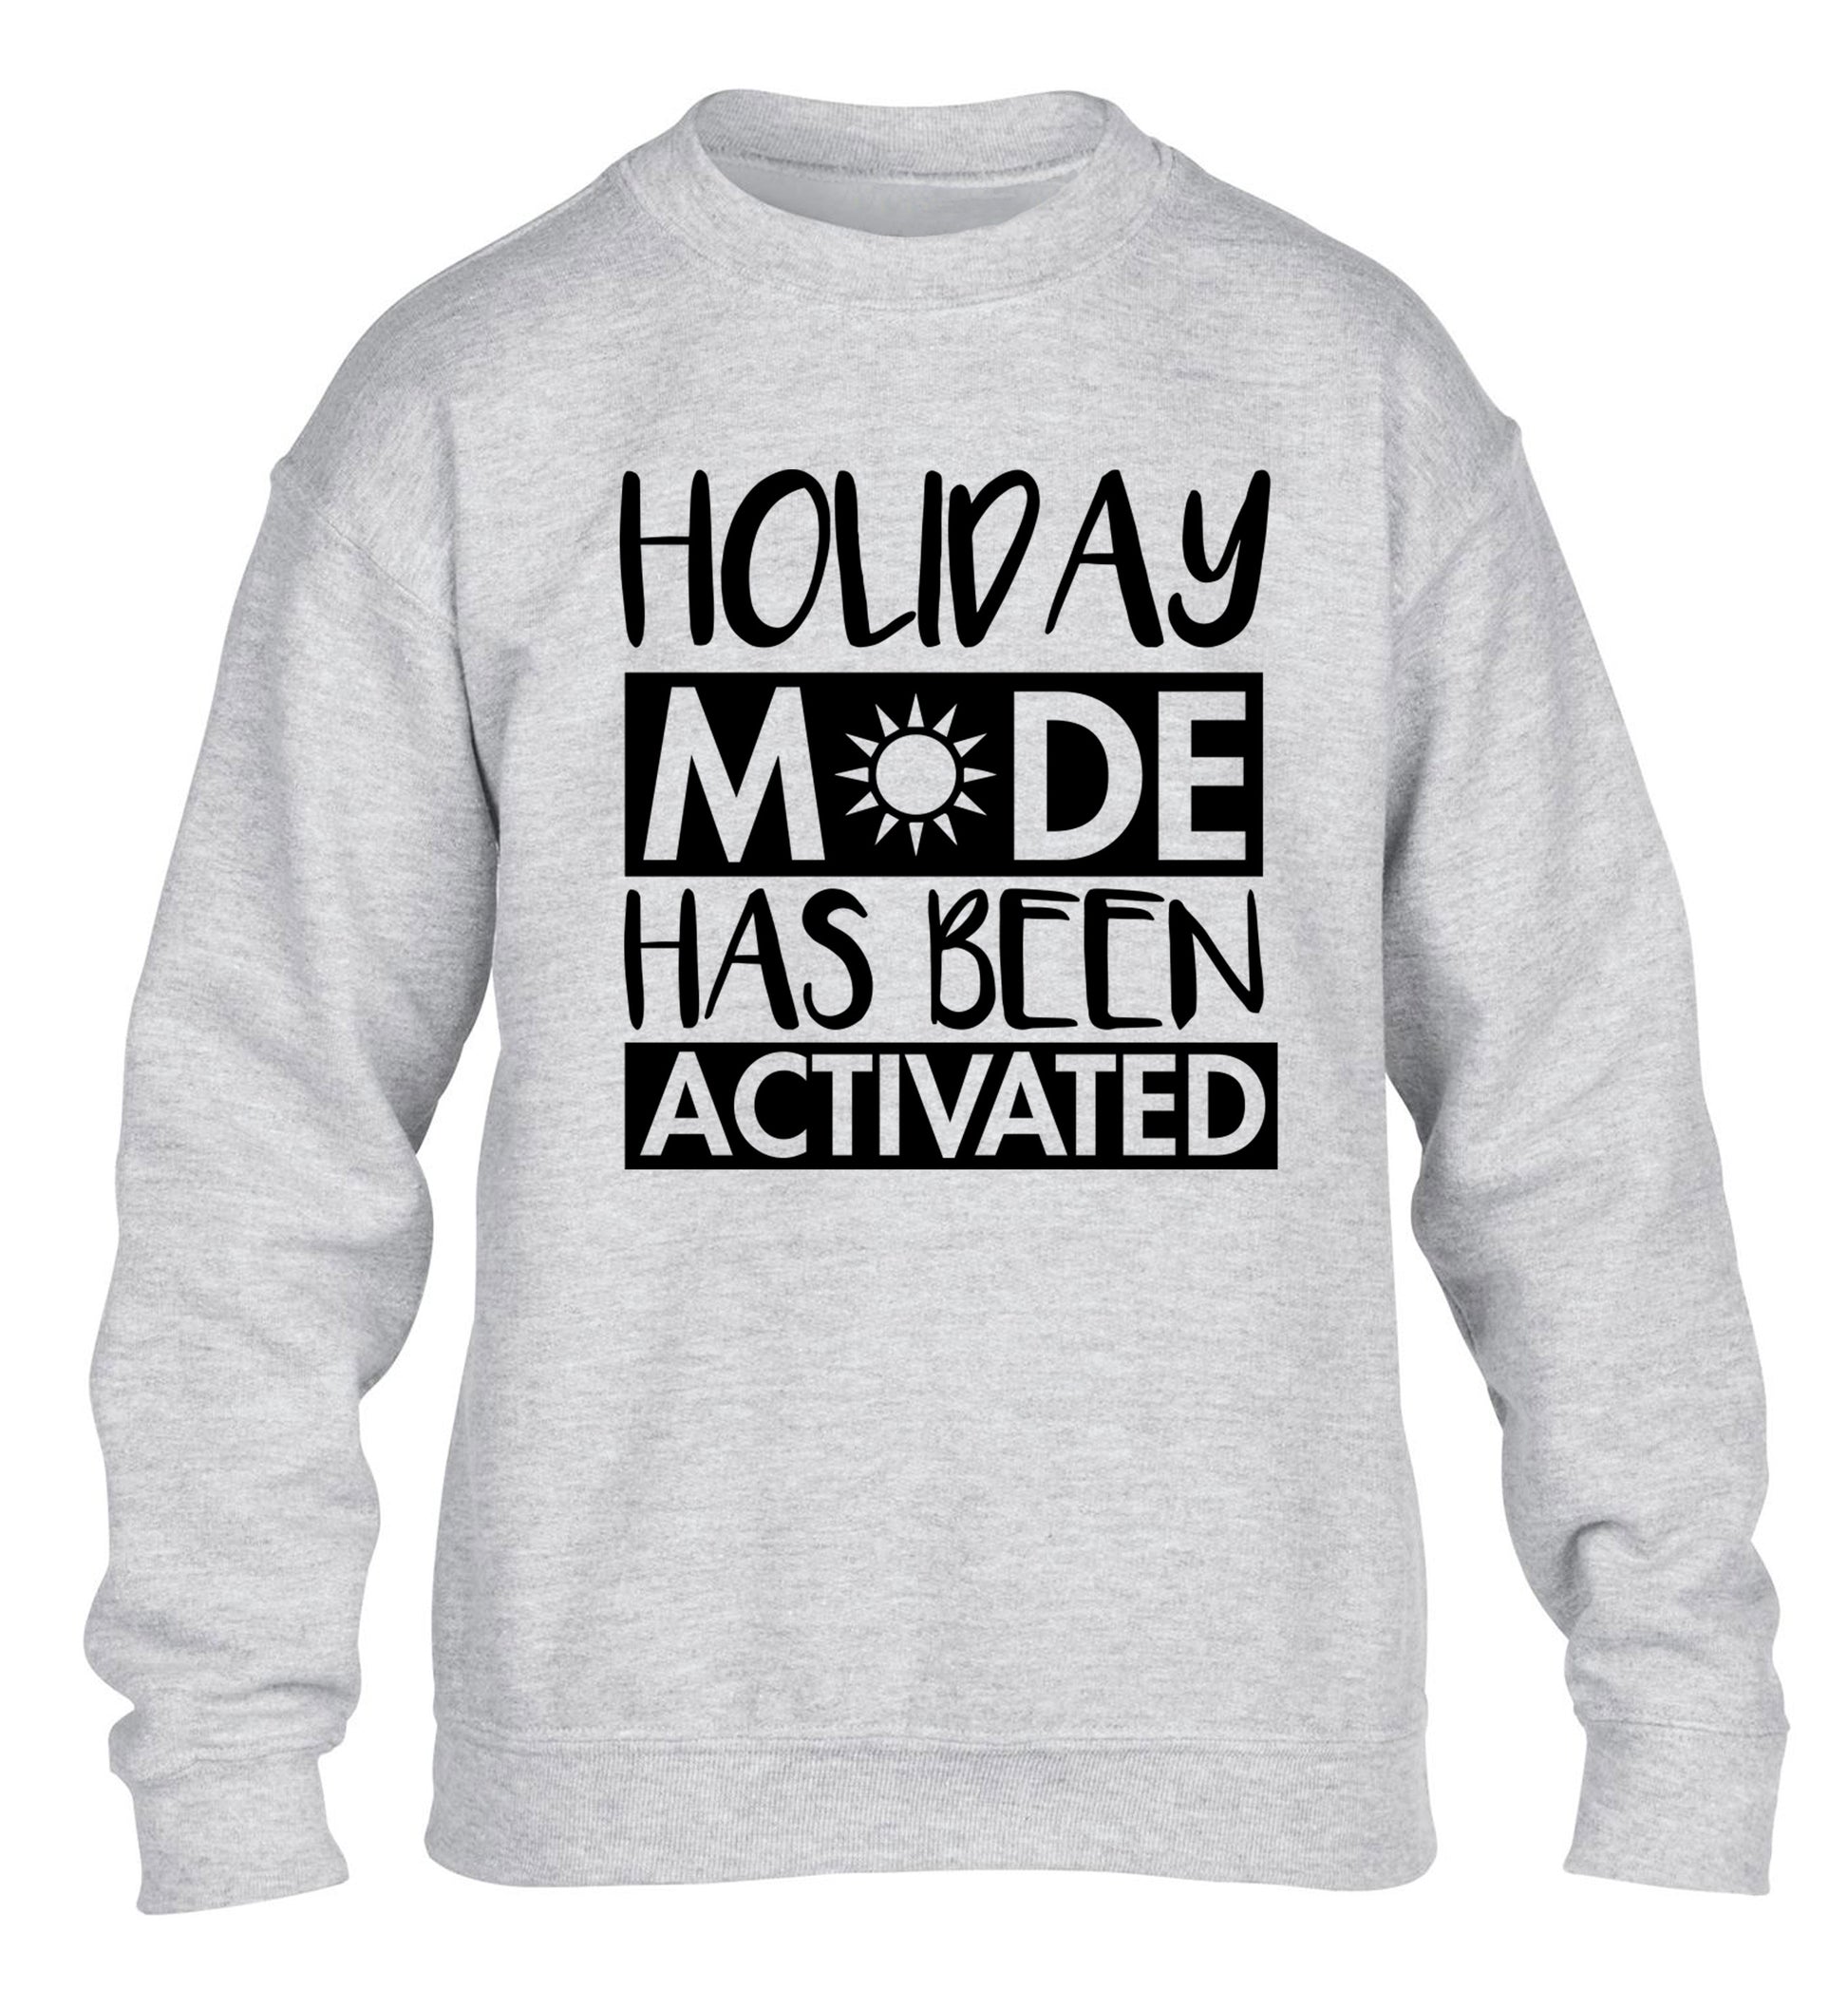 Holiday mode has been activated children's grey sweater 12-14 Years